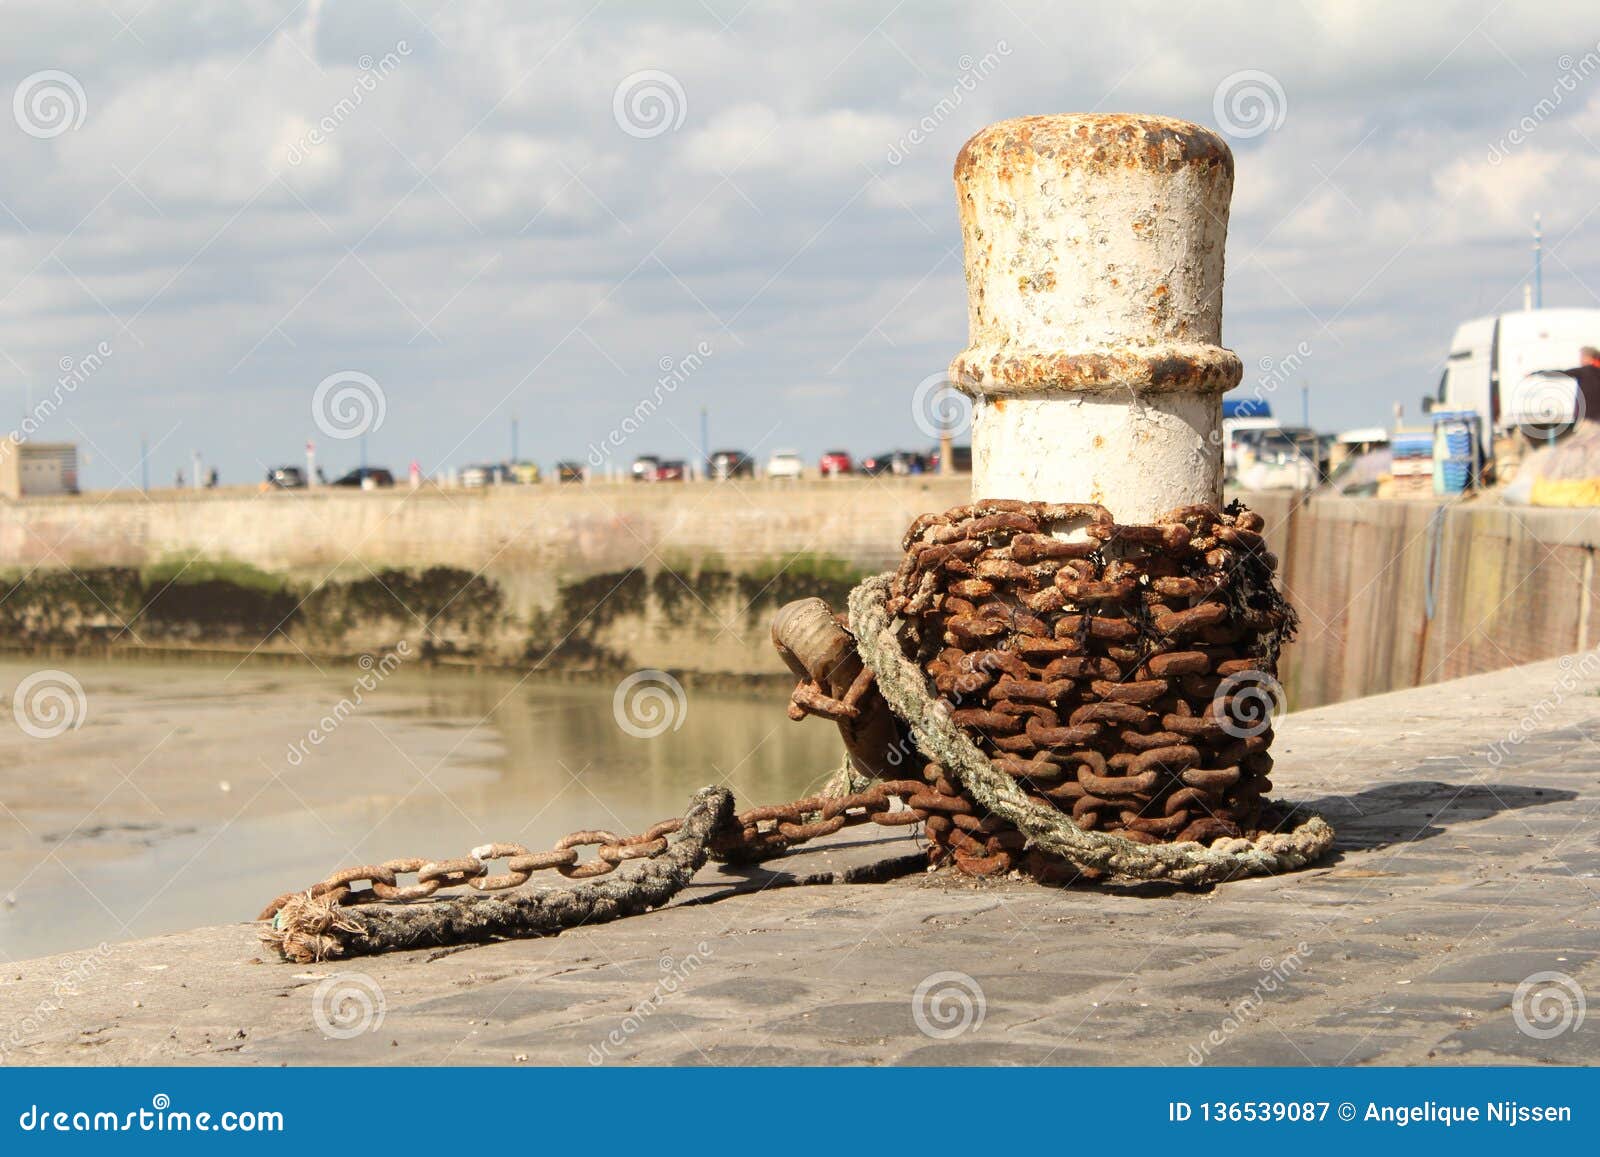 A white bollard with a rusty chain closeup at the harbour in normandy. A white bollard with a rusty chain macro at the quay in the harbour in saint-valery-en-caux, normandy, france in summer